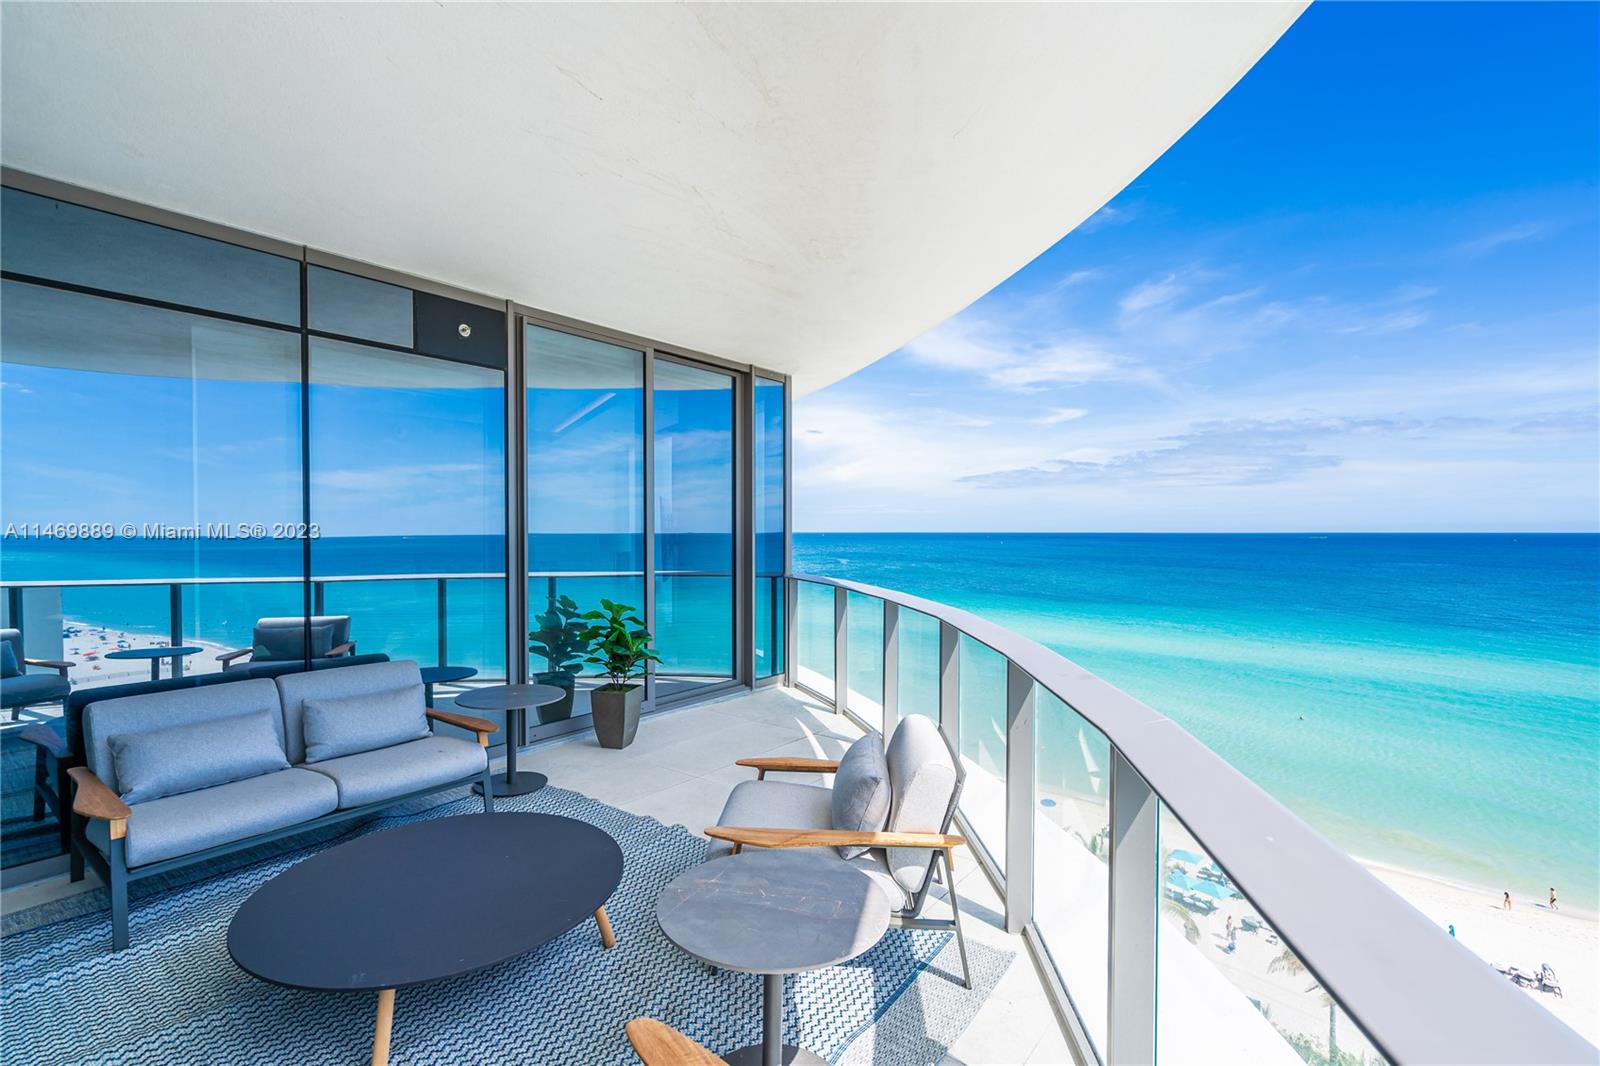 AMAZING oceanfront 4 beds + den / 5.5 baths unit at The Ritz Carlton Sunny Isles!!  It boasts the largest layout in the whole building, and let me tell you, the views are absolutely breathtaking!  From all the balconies and floor to ceiling glass windows throughout the unit, you get to enjoy beautiful panoramic views of the ocean, bay, and skyline!  This unit comes with a private elevator for added convenience. The kitchen is a dream come true, featuring Snaidero cabinets and top-of-the-line Gaggenau appliances.  The entire unit has been professionally designed and furnished with no expense spared! Seller Financing Available.

If you're looking for a true piece of heaven by the ocean, this is it!